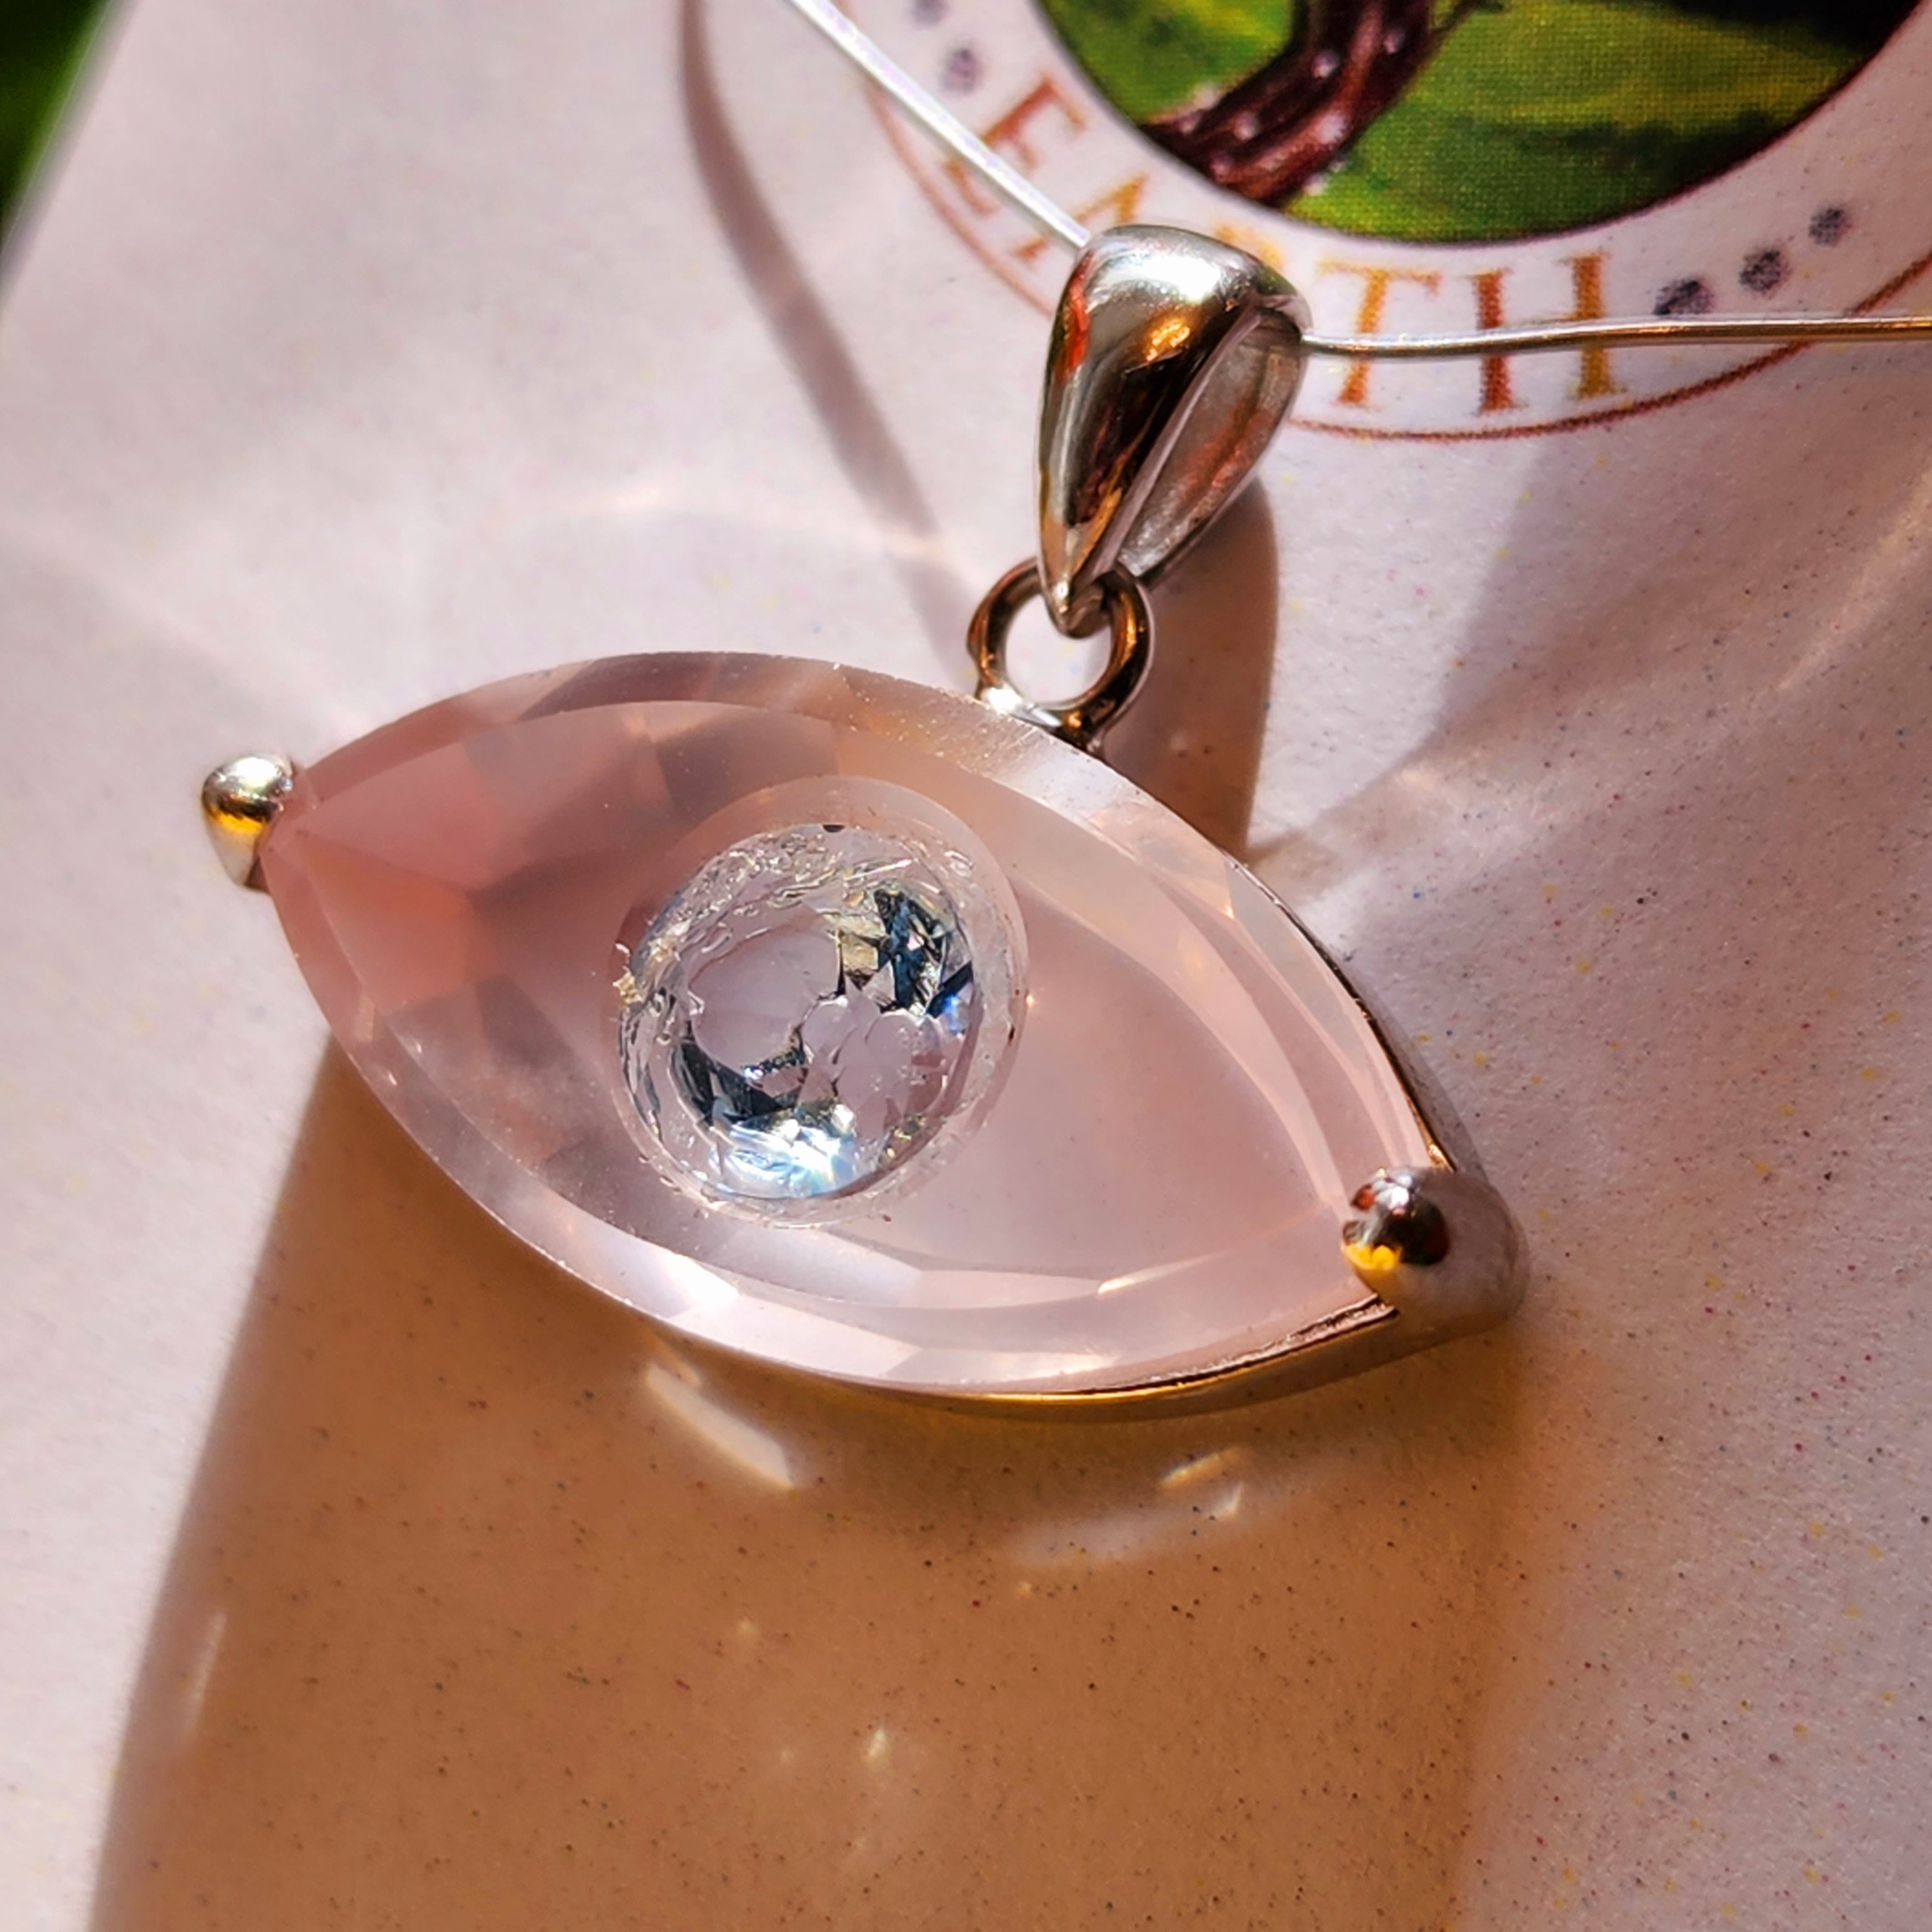 Rose Quartz Evil Eye with Blue Topaz Inlay Pendant .925 Silver for Protection and Manifesting